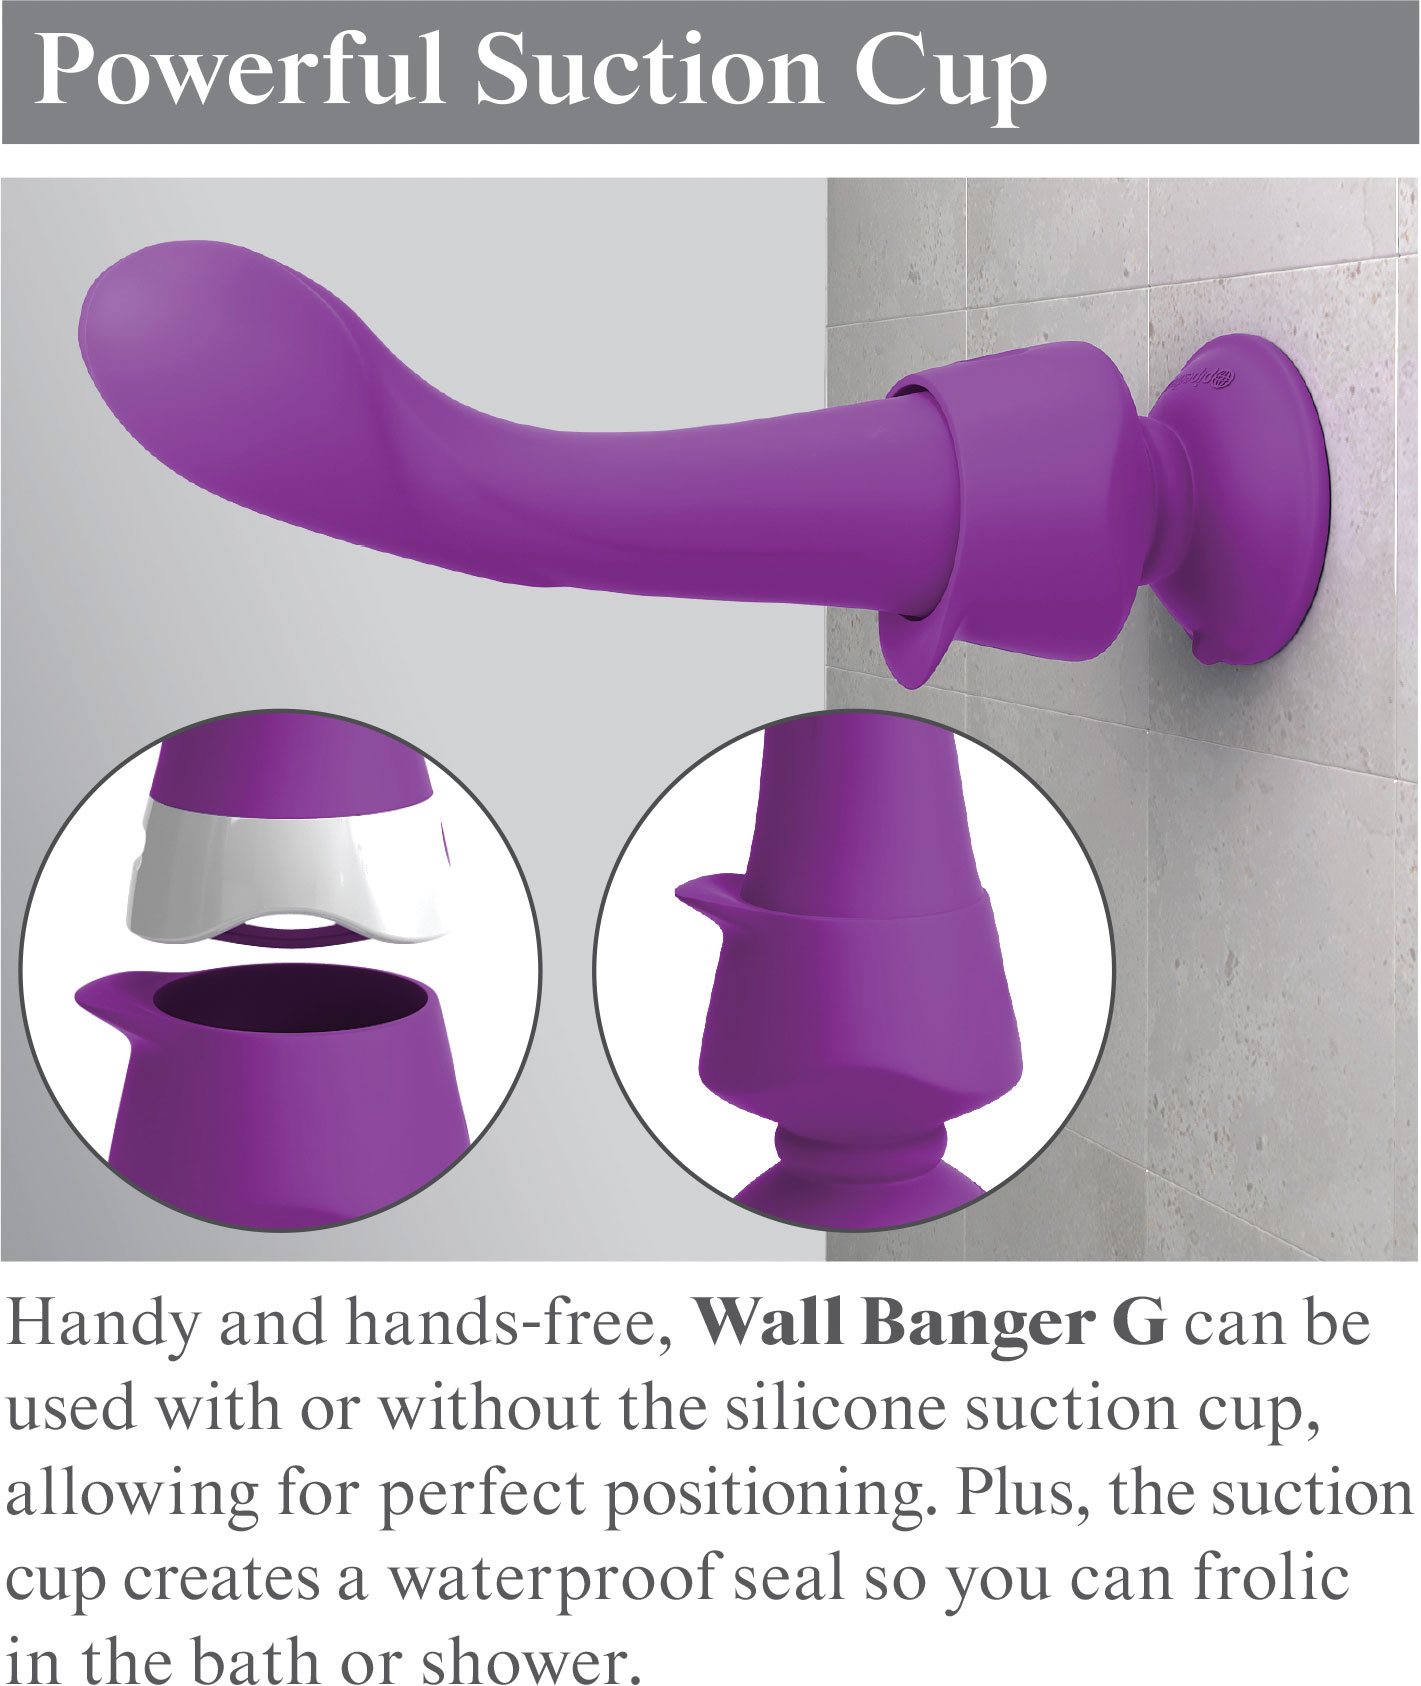 3Some Wall Banger G Rechargeable Remote Control Silicone G-Spot Vibrator - Powerful Suction Cup